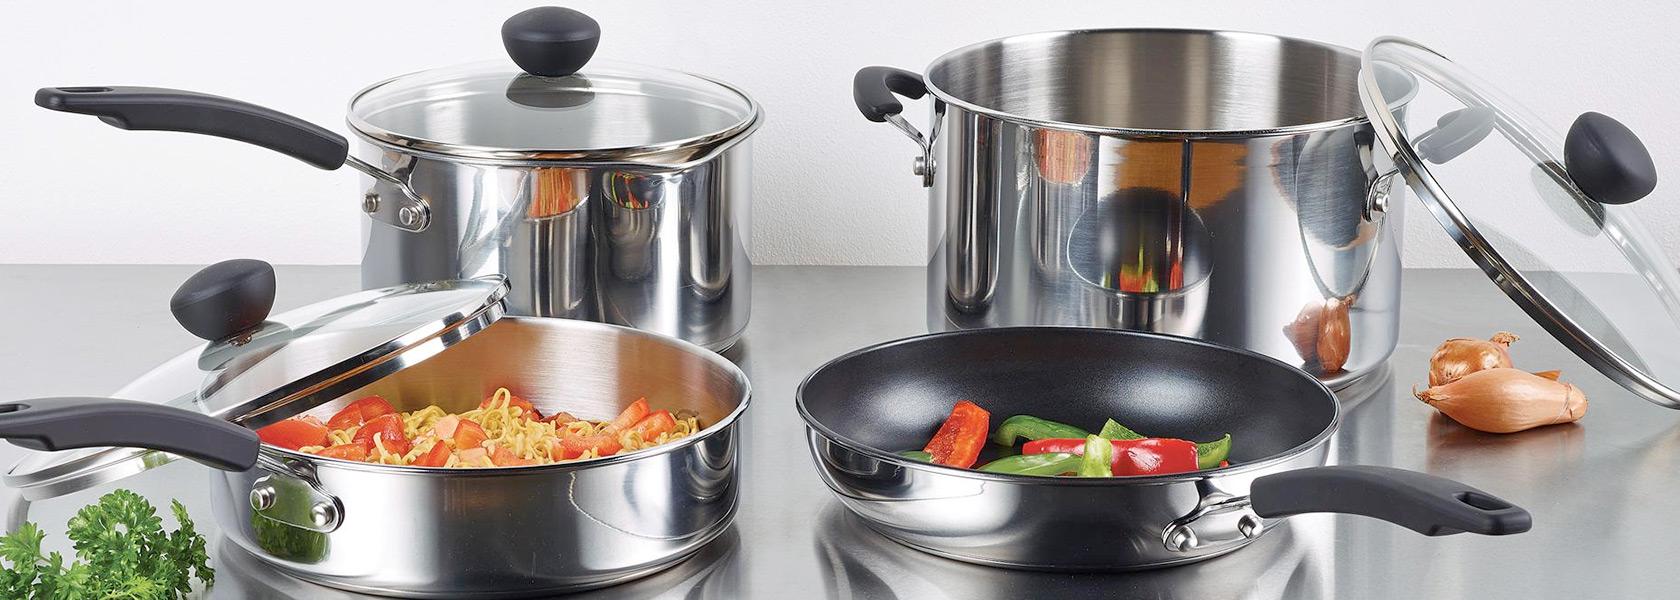 Pot Shots – The Essential Guide to Selecting the Right Pots & Pans